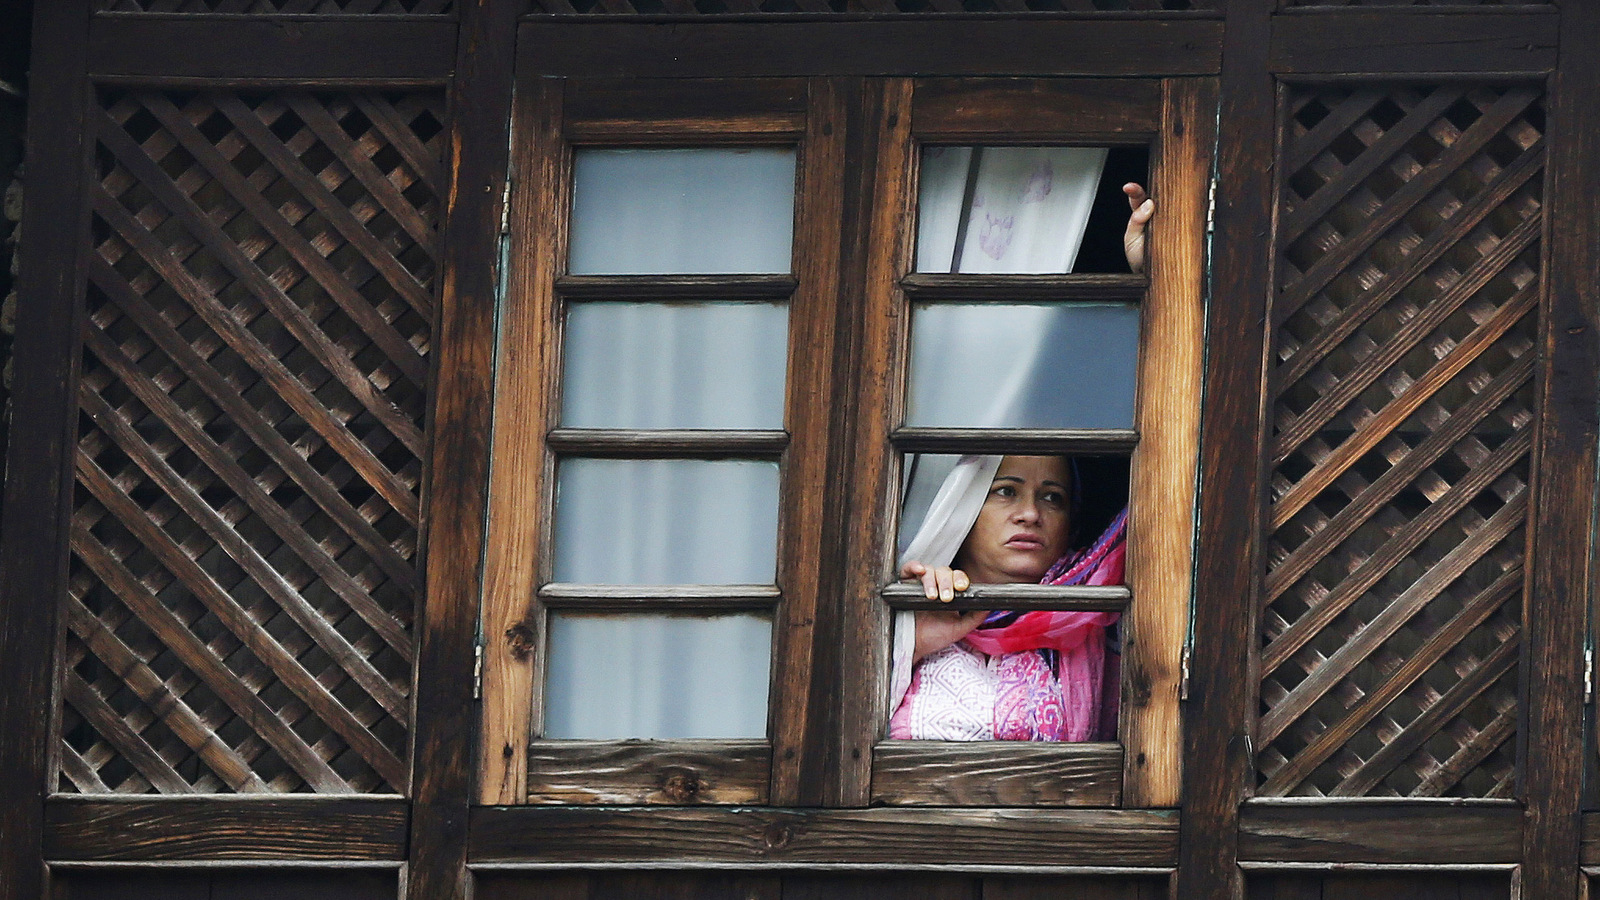 A Kashmiri woman watches Martyrs' Day ceremony from the window of her house in Srinagar, Indian controlled Kashmir, July 13, 2017. July 13 is observed as Martyrs' Day in memory of the day when the region s Hindu king ordered more than 20 Kashmiri Muslims executed in a bid to put down an uprising in 1931. (AP/Mukhtar Khan)